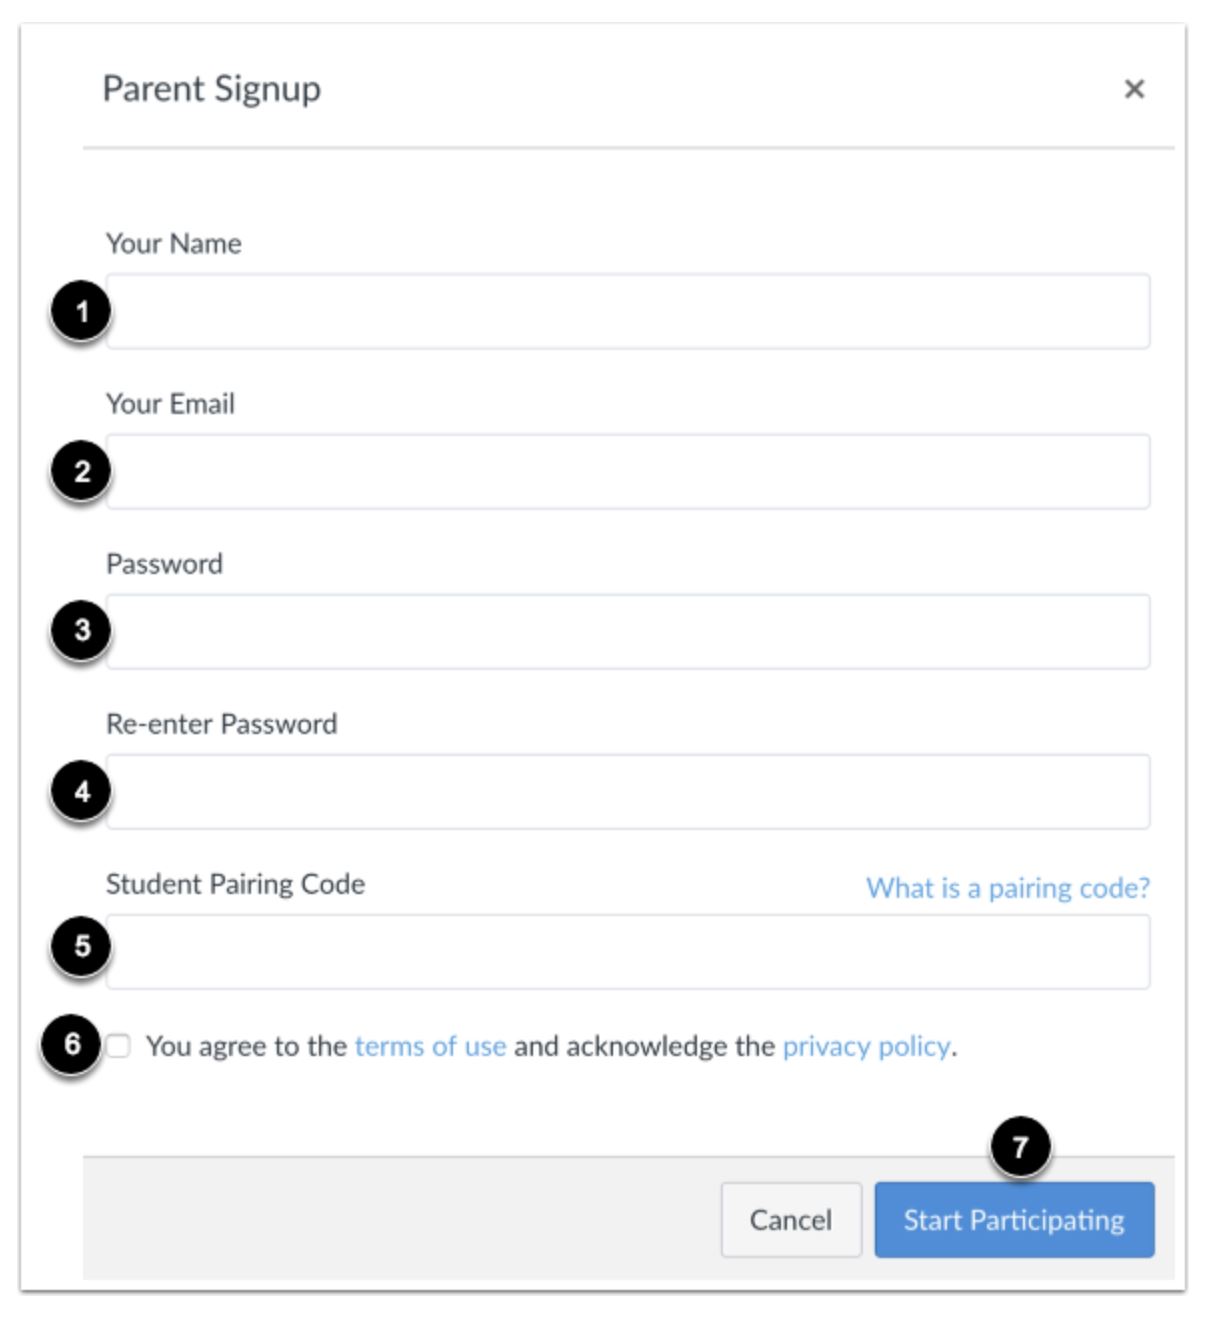 sign up details page